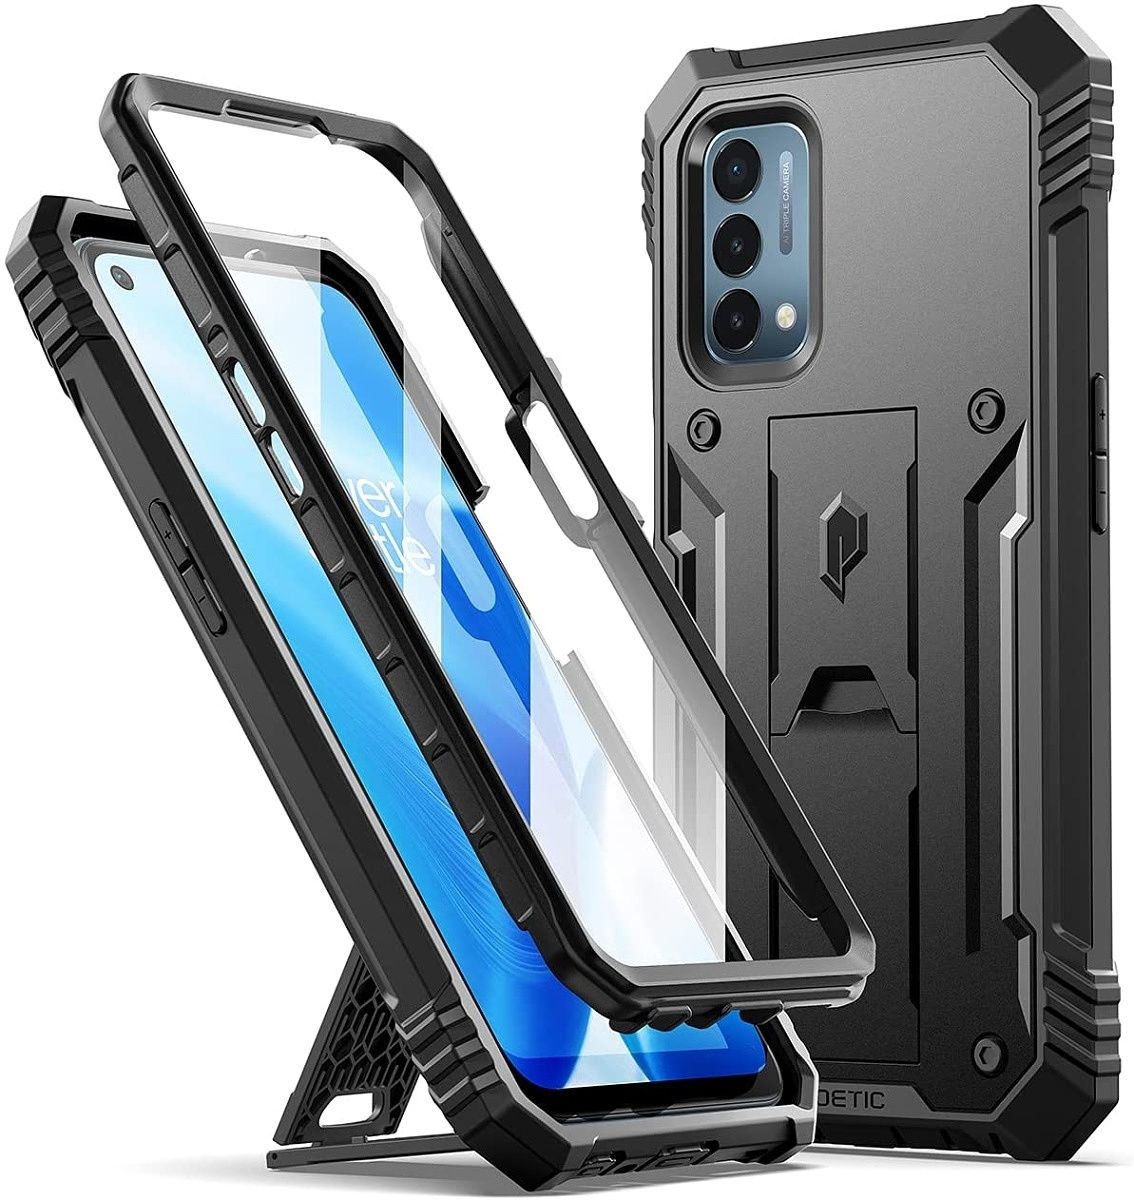 The Poetic Revolution Series is a sturdy case for your phone. Thanks to the built-screen protector, it provides 360-degree protection to the Nord N200. In addition, the case offers military-grade drop protection and has a kickstand for hands-free media consumption.